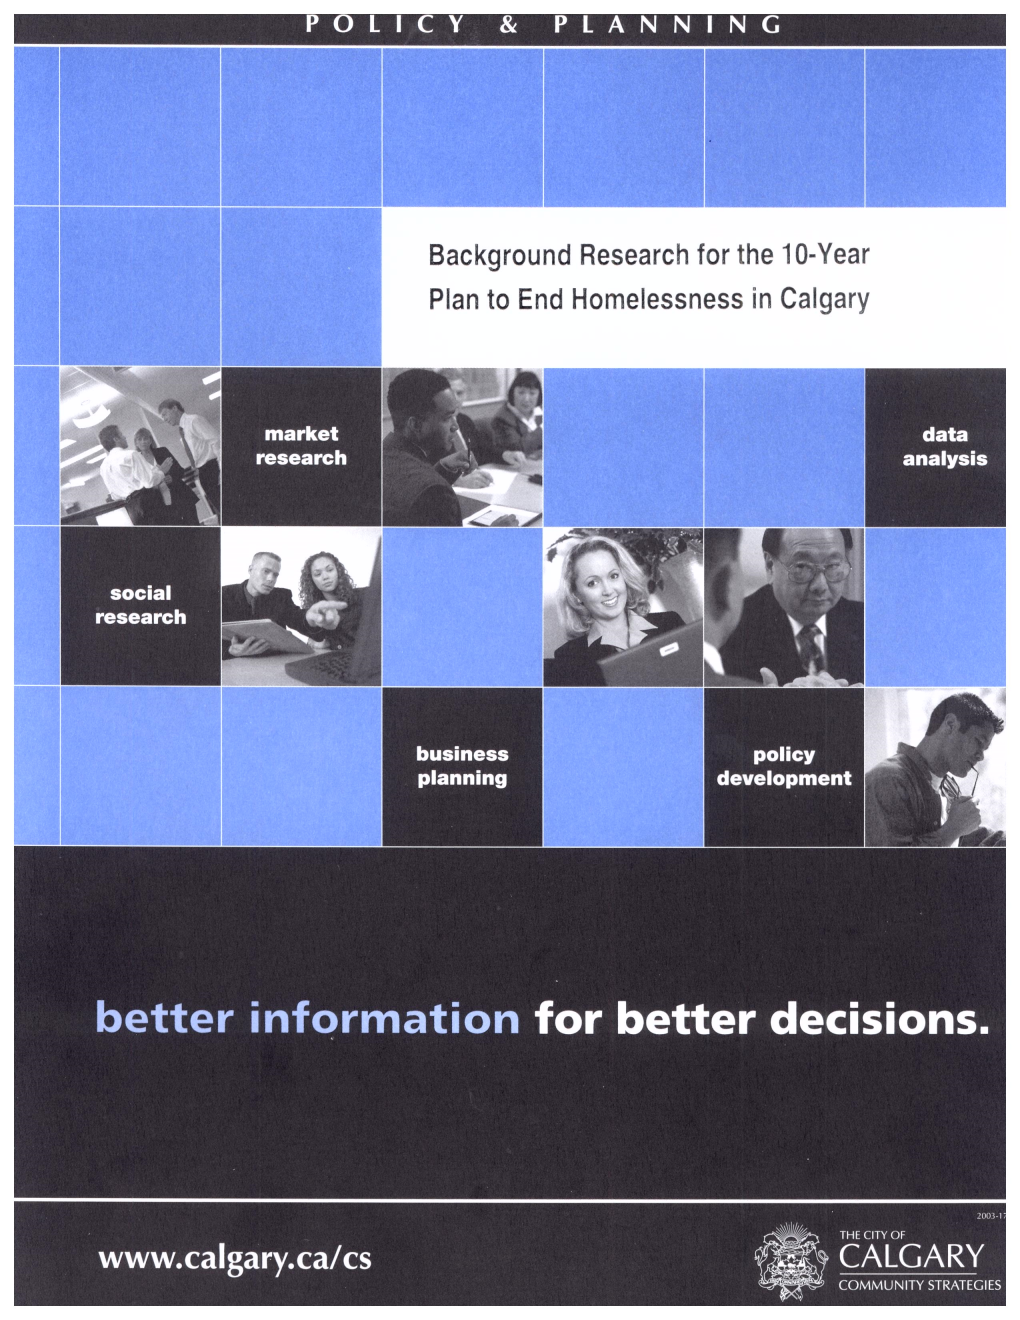 Background Research for the 10-Year Plan to End Homelessness in Calgary